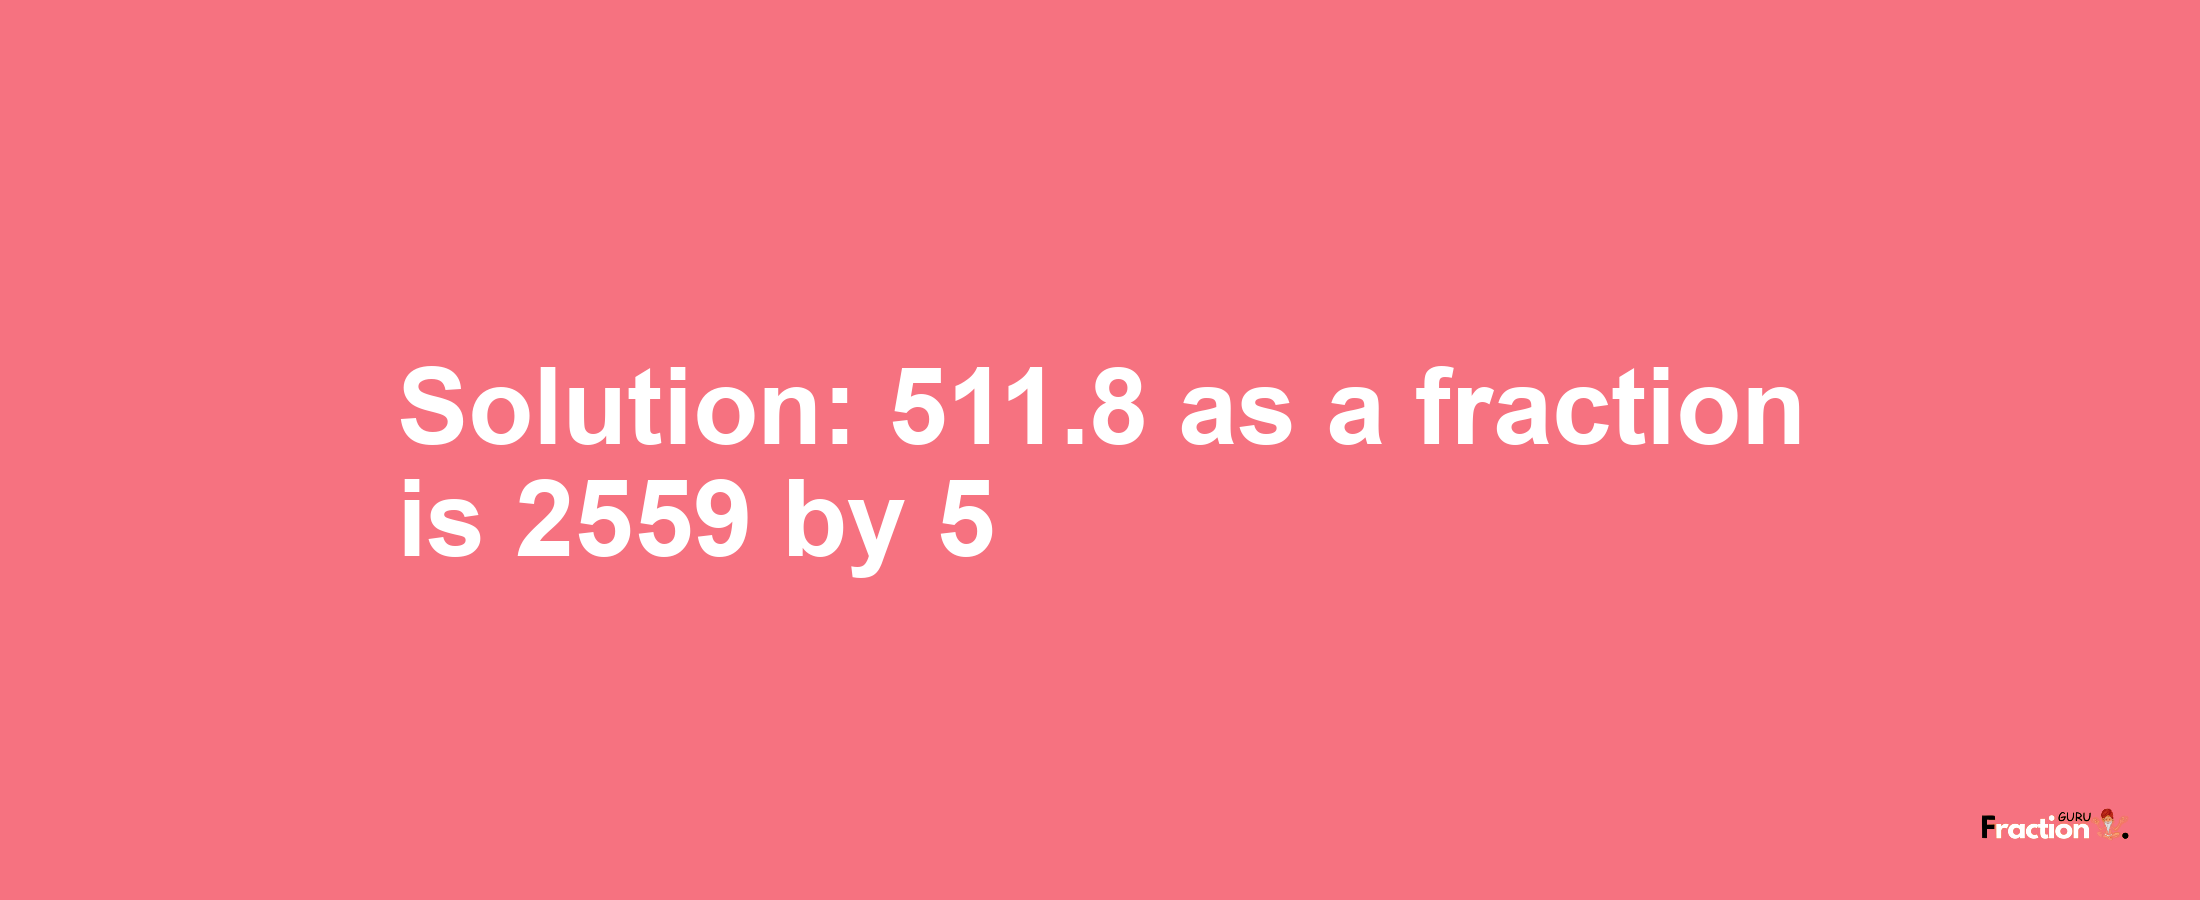 Solution:511.8 as a fraction is 2559/5